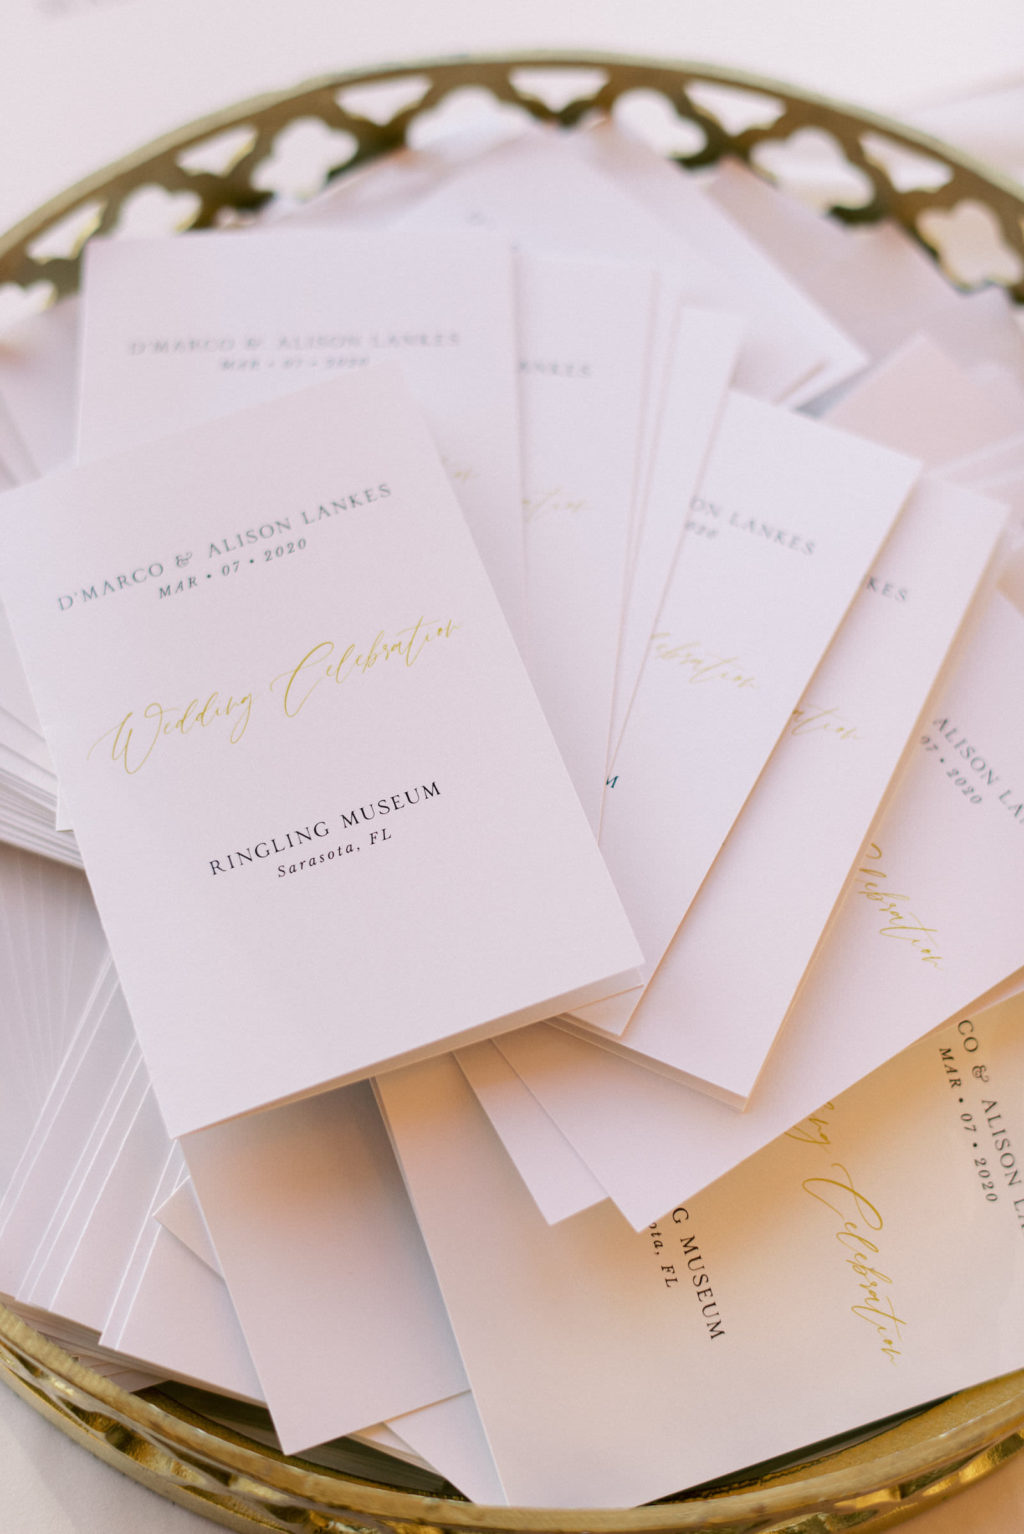 Classic Florida Wedding Invitation with Gold Foil, Black Script and Ivory Paper, The Ringling Museum of Art Courtyard in Sarasota | Florida Wedding Planner NK Weddings